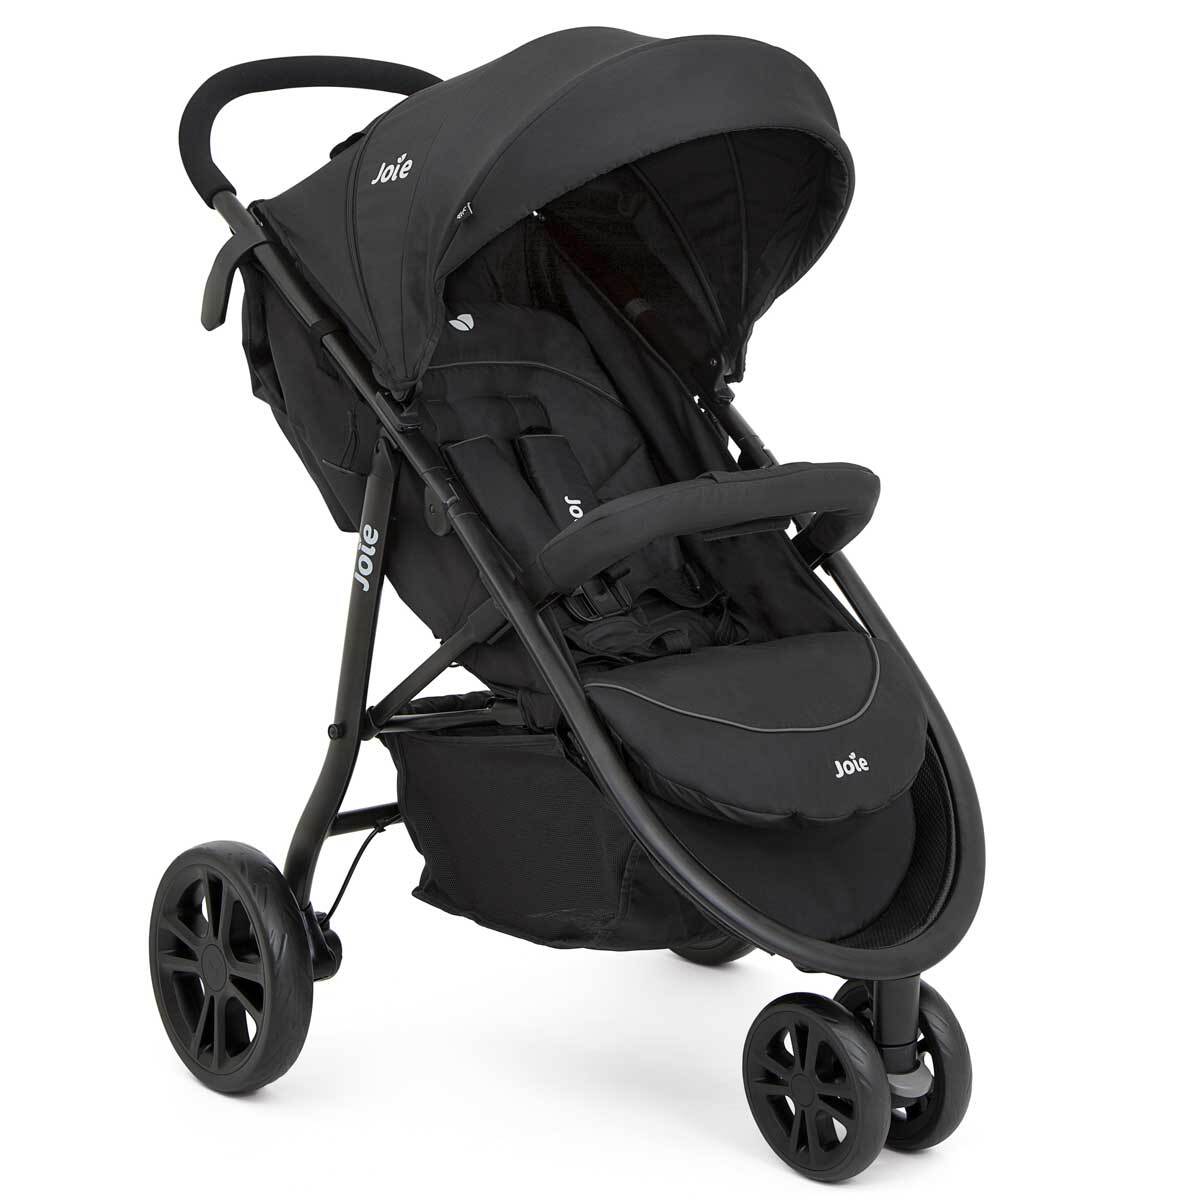 Joie Litetrax 3 in Coal 3-in-1 Pushchair | Early Learning Centre